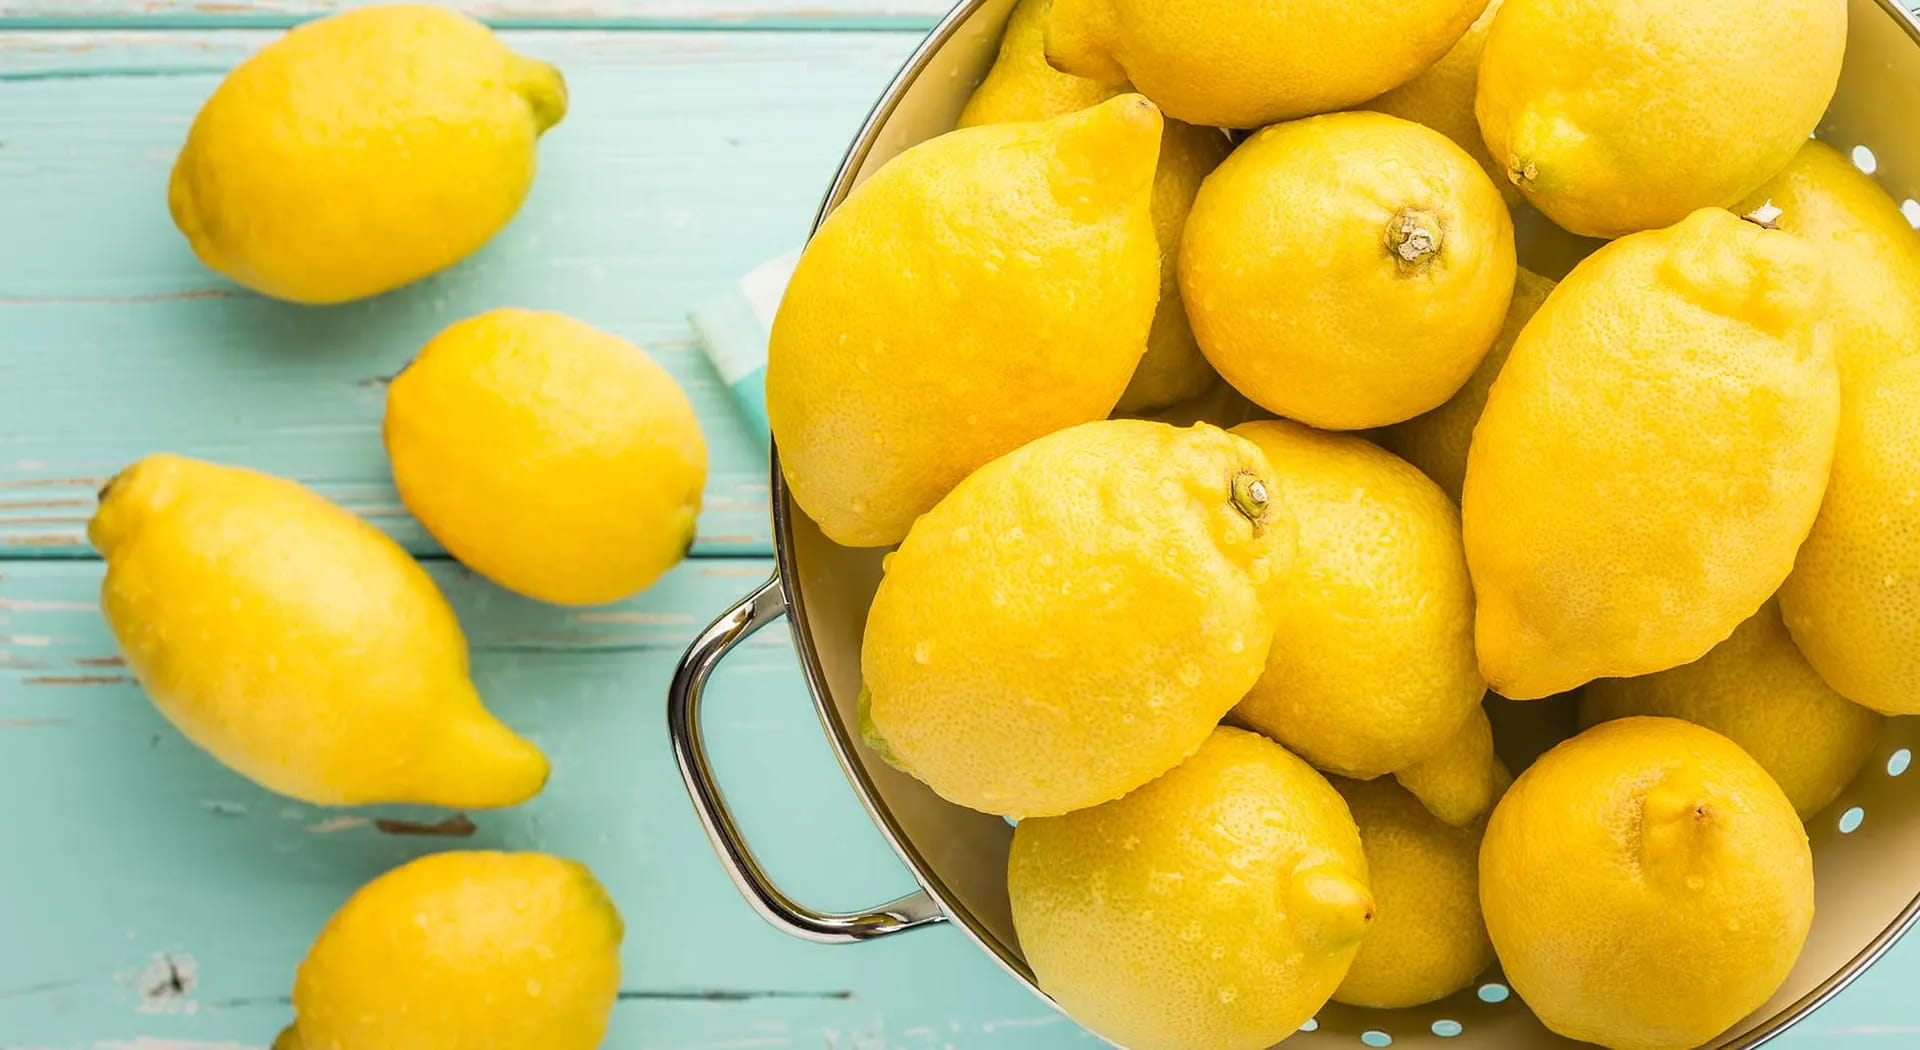 Uses of lemon in the kitchen: 10 uses you wouldn't expect